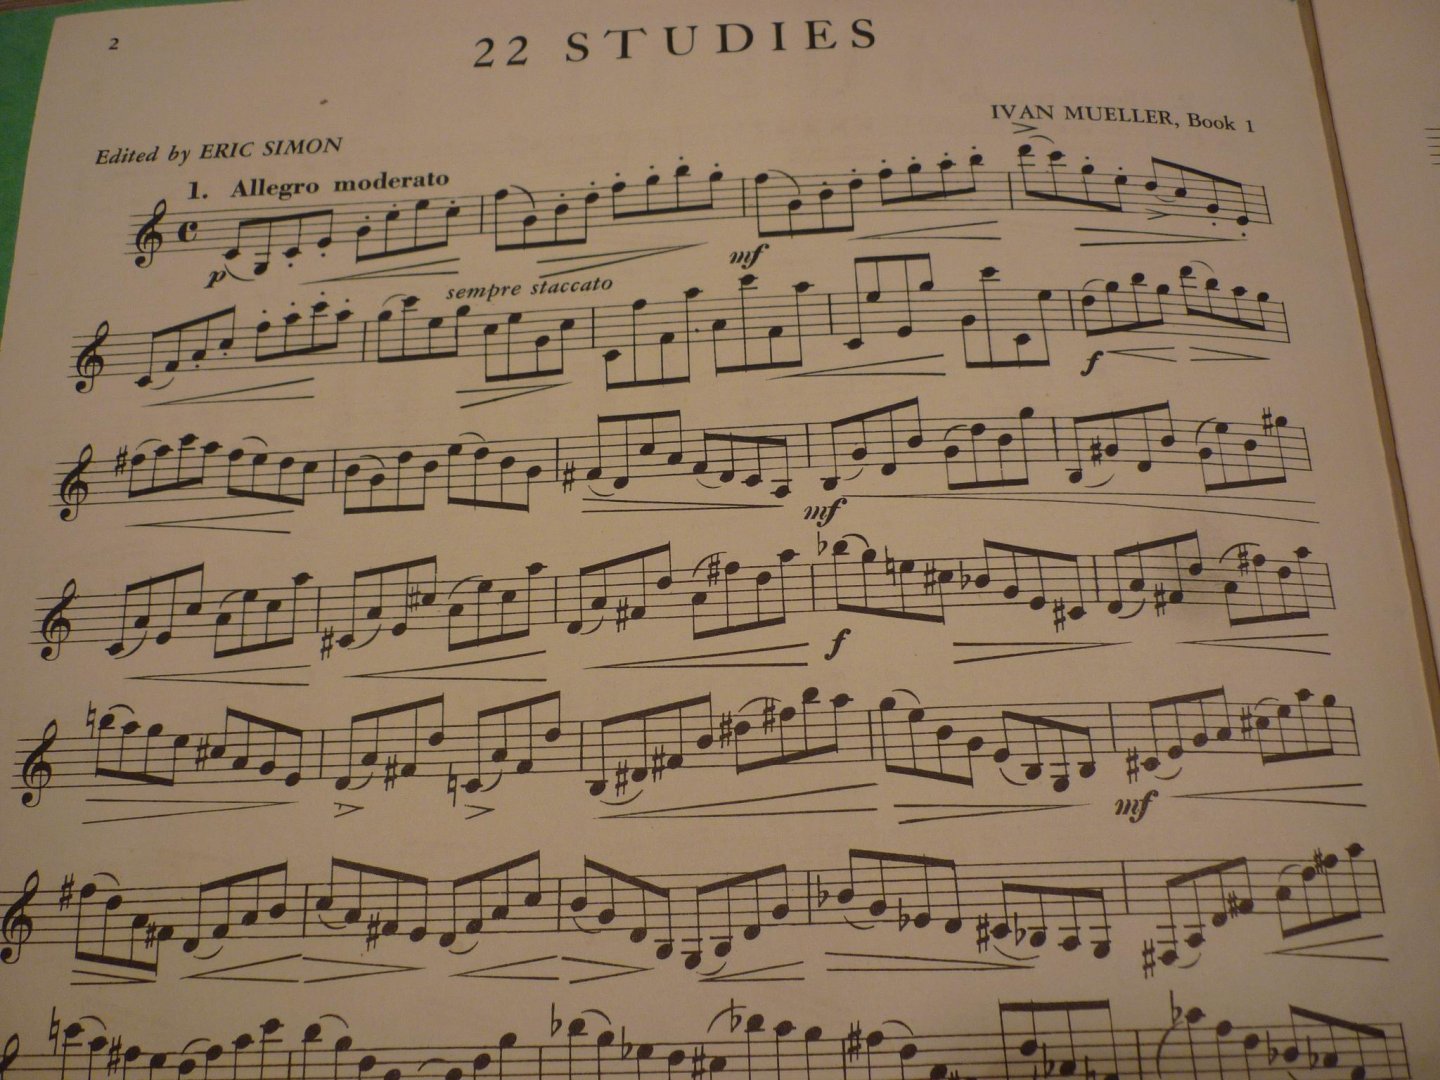 Mueller; Ivan - 22 Studies for Clarinet - Book I; edited by Eric Simon